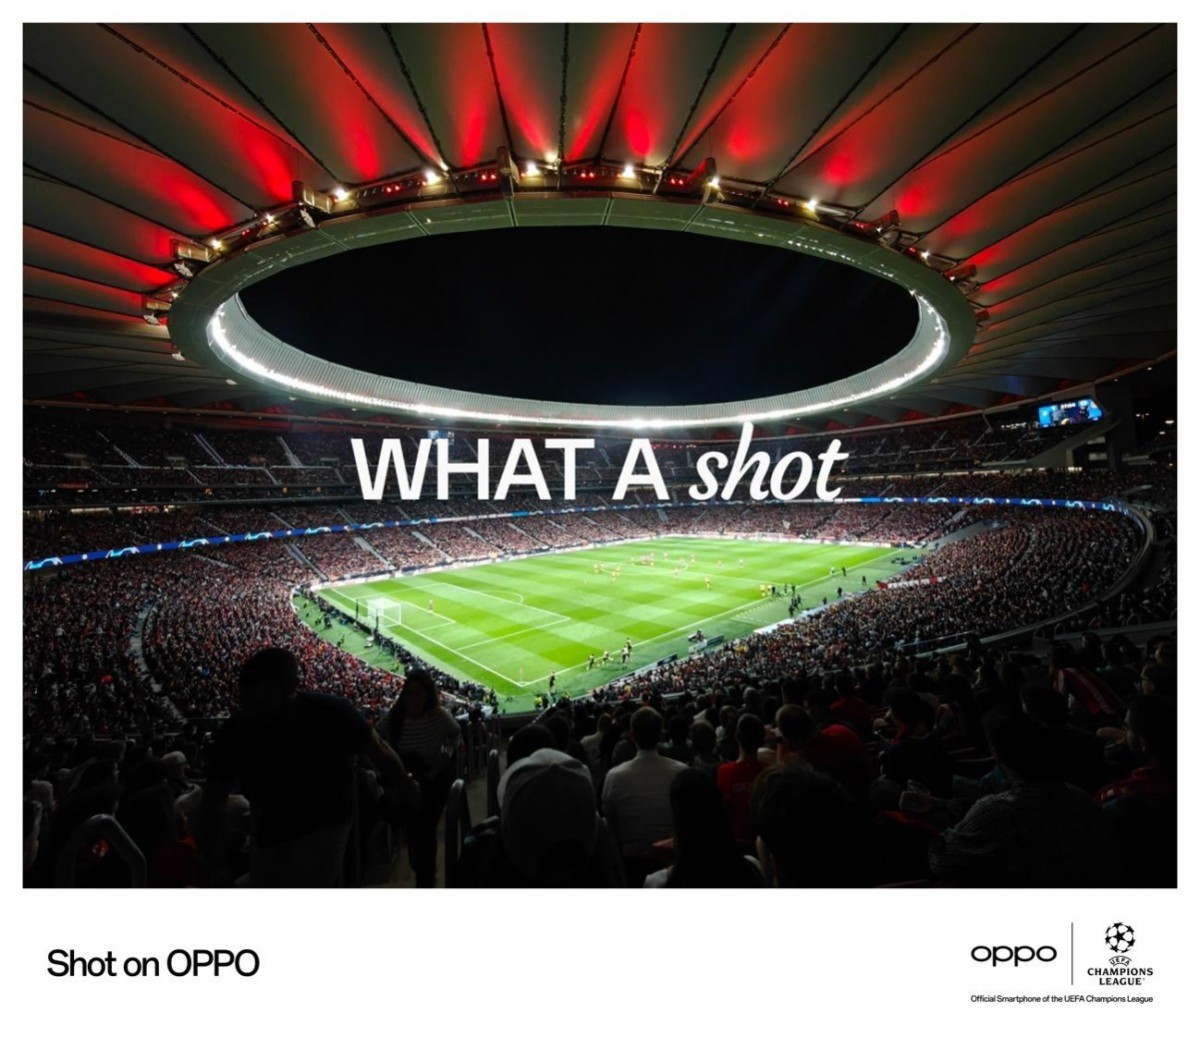 Oppo collaborates with Kaka for the 2024 UEFA Champions League Final